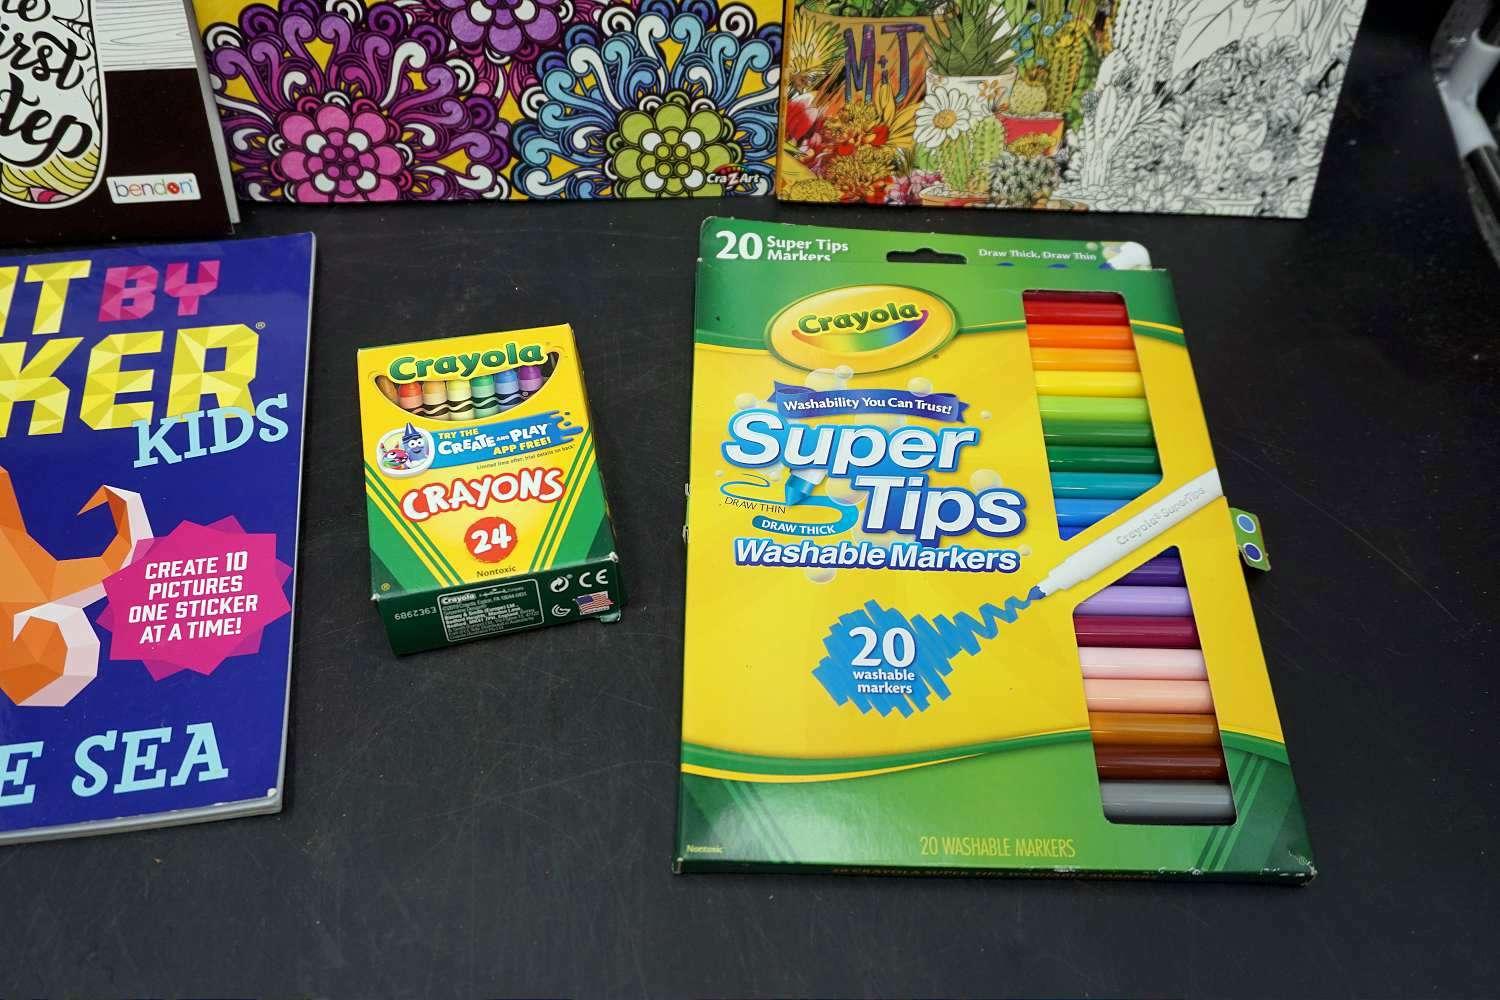 coloring books and art supplies.